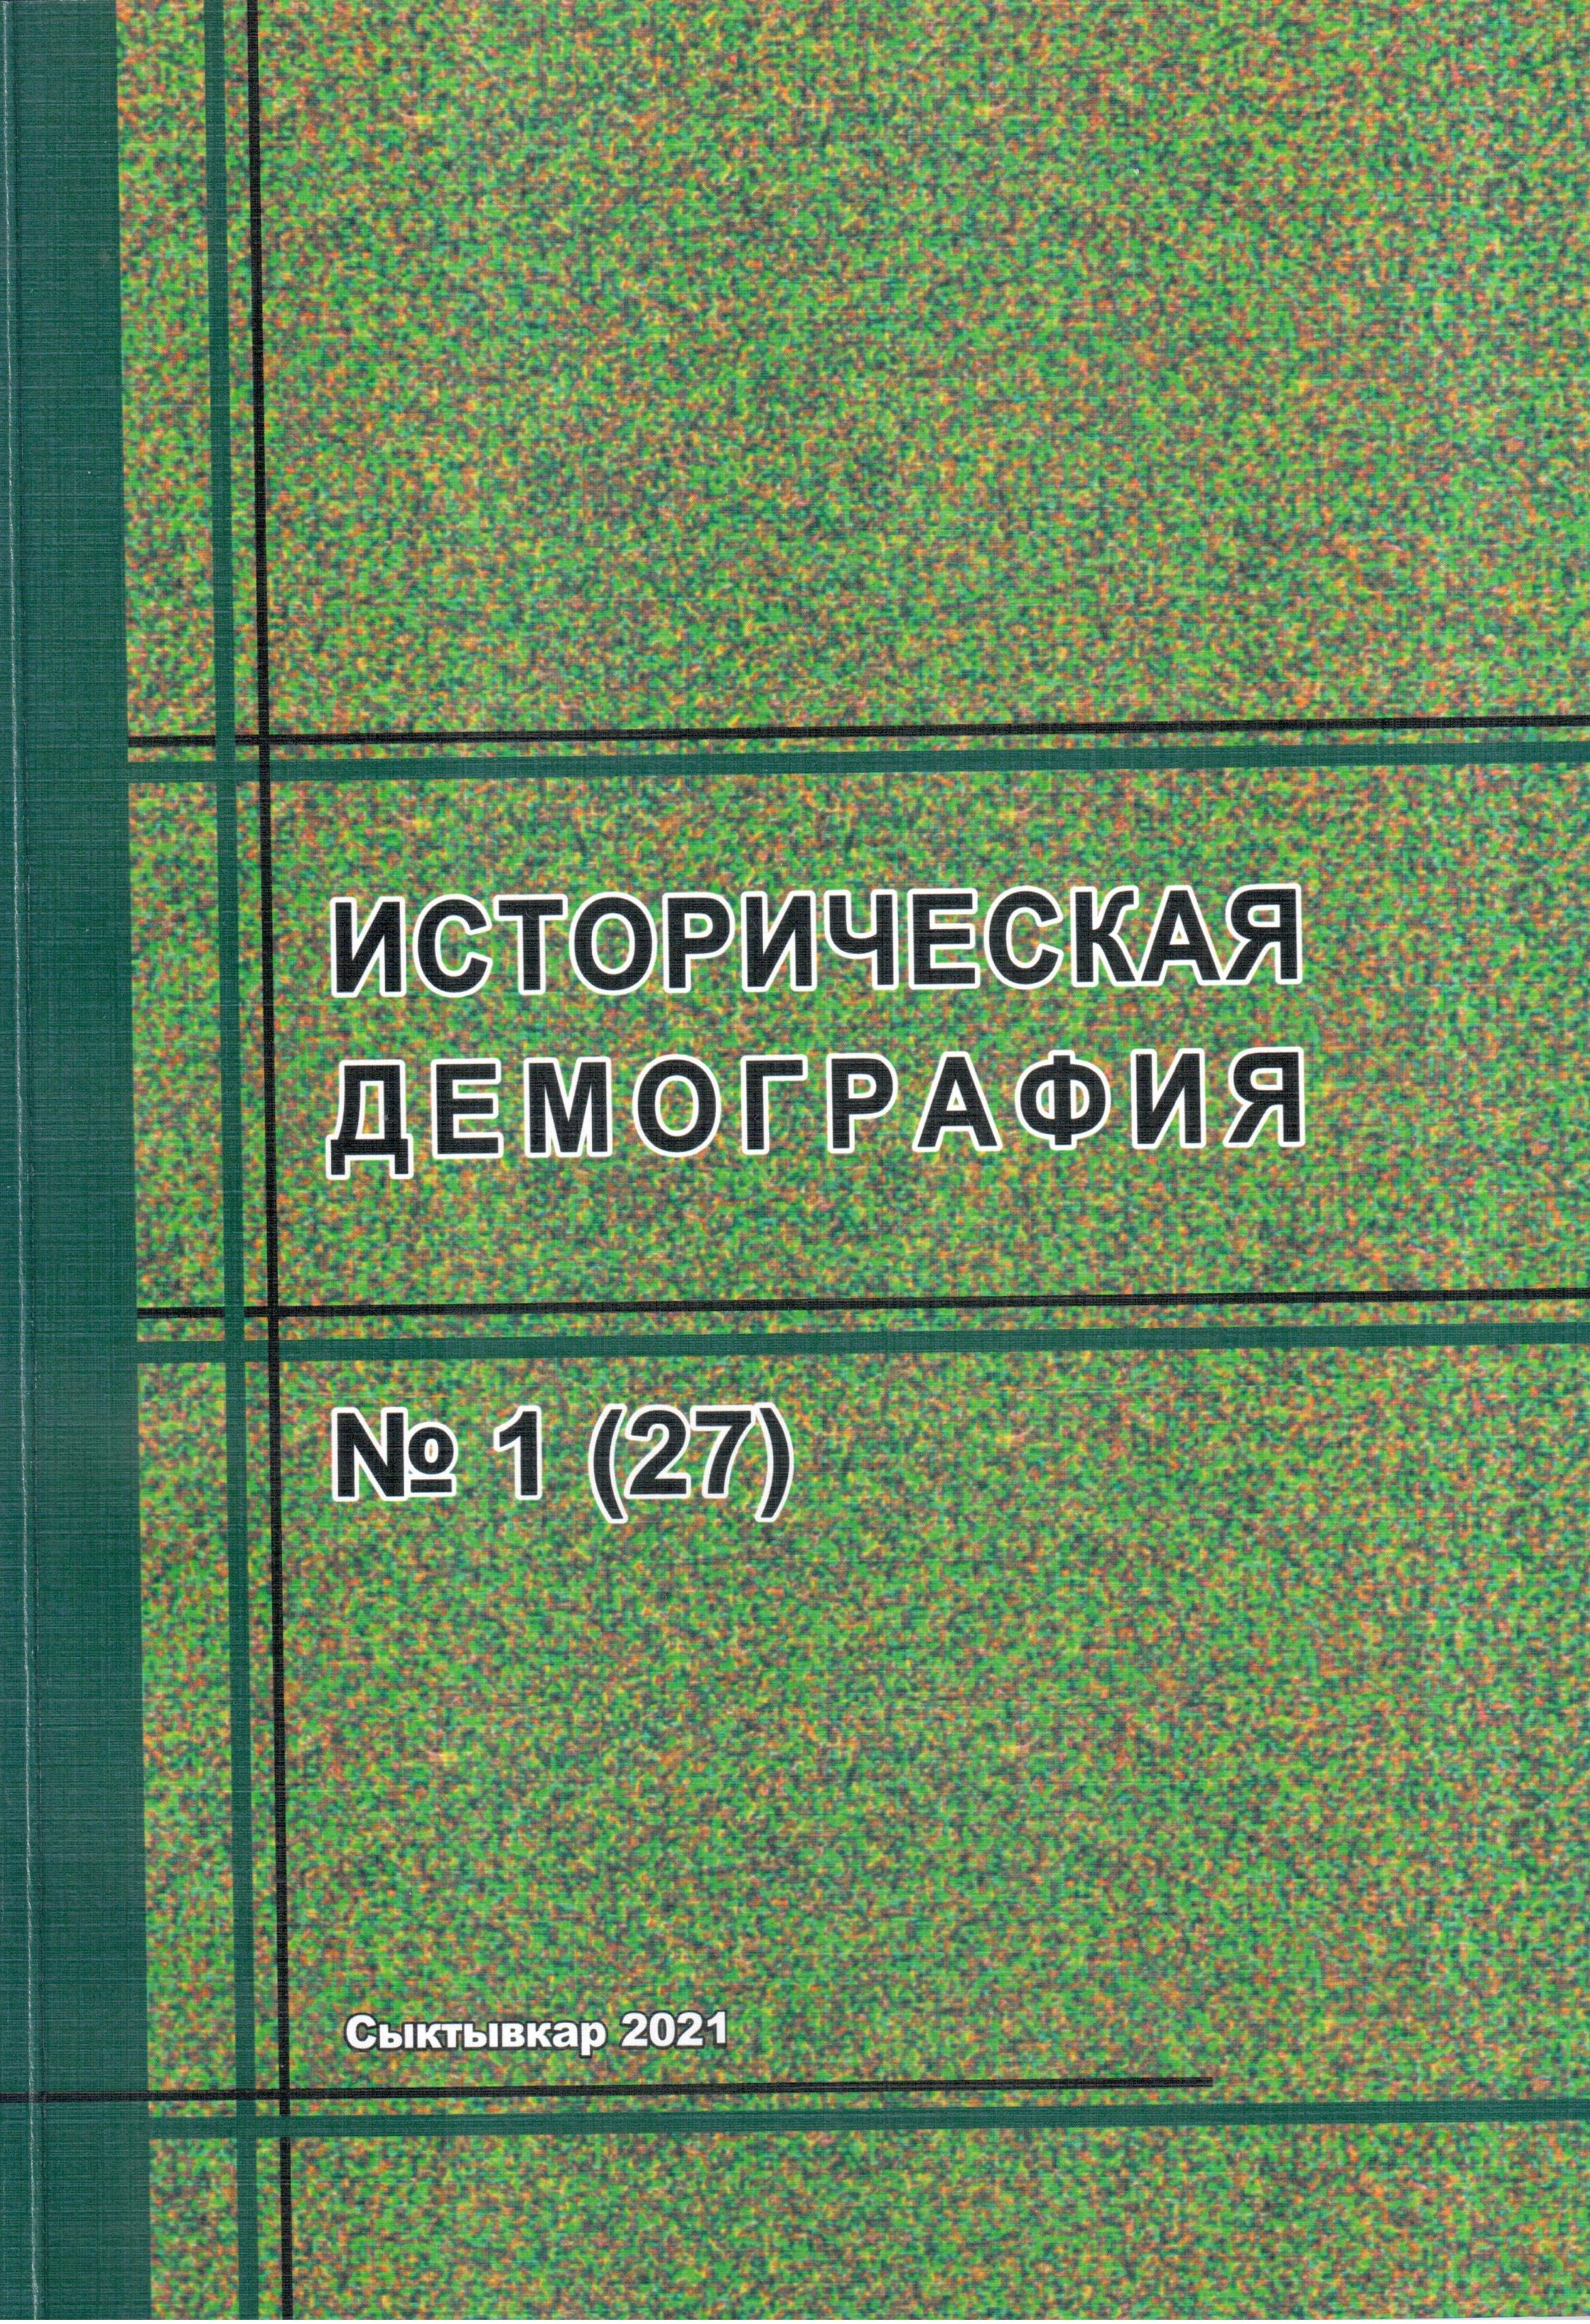                         Revision tales (lists) of the city of Ust-Sysolsk of the tenth census of the population of the Russian Empire
            